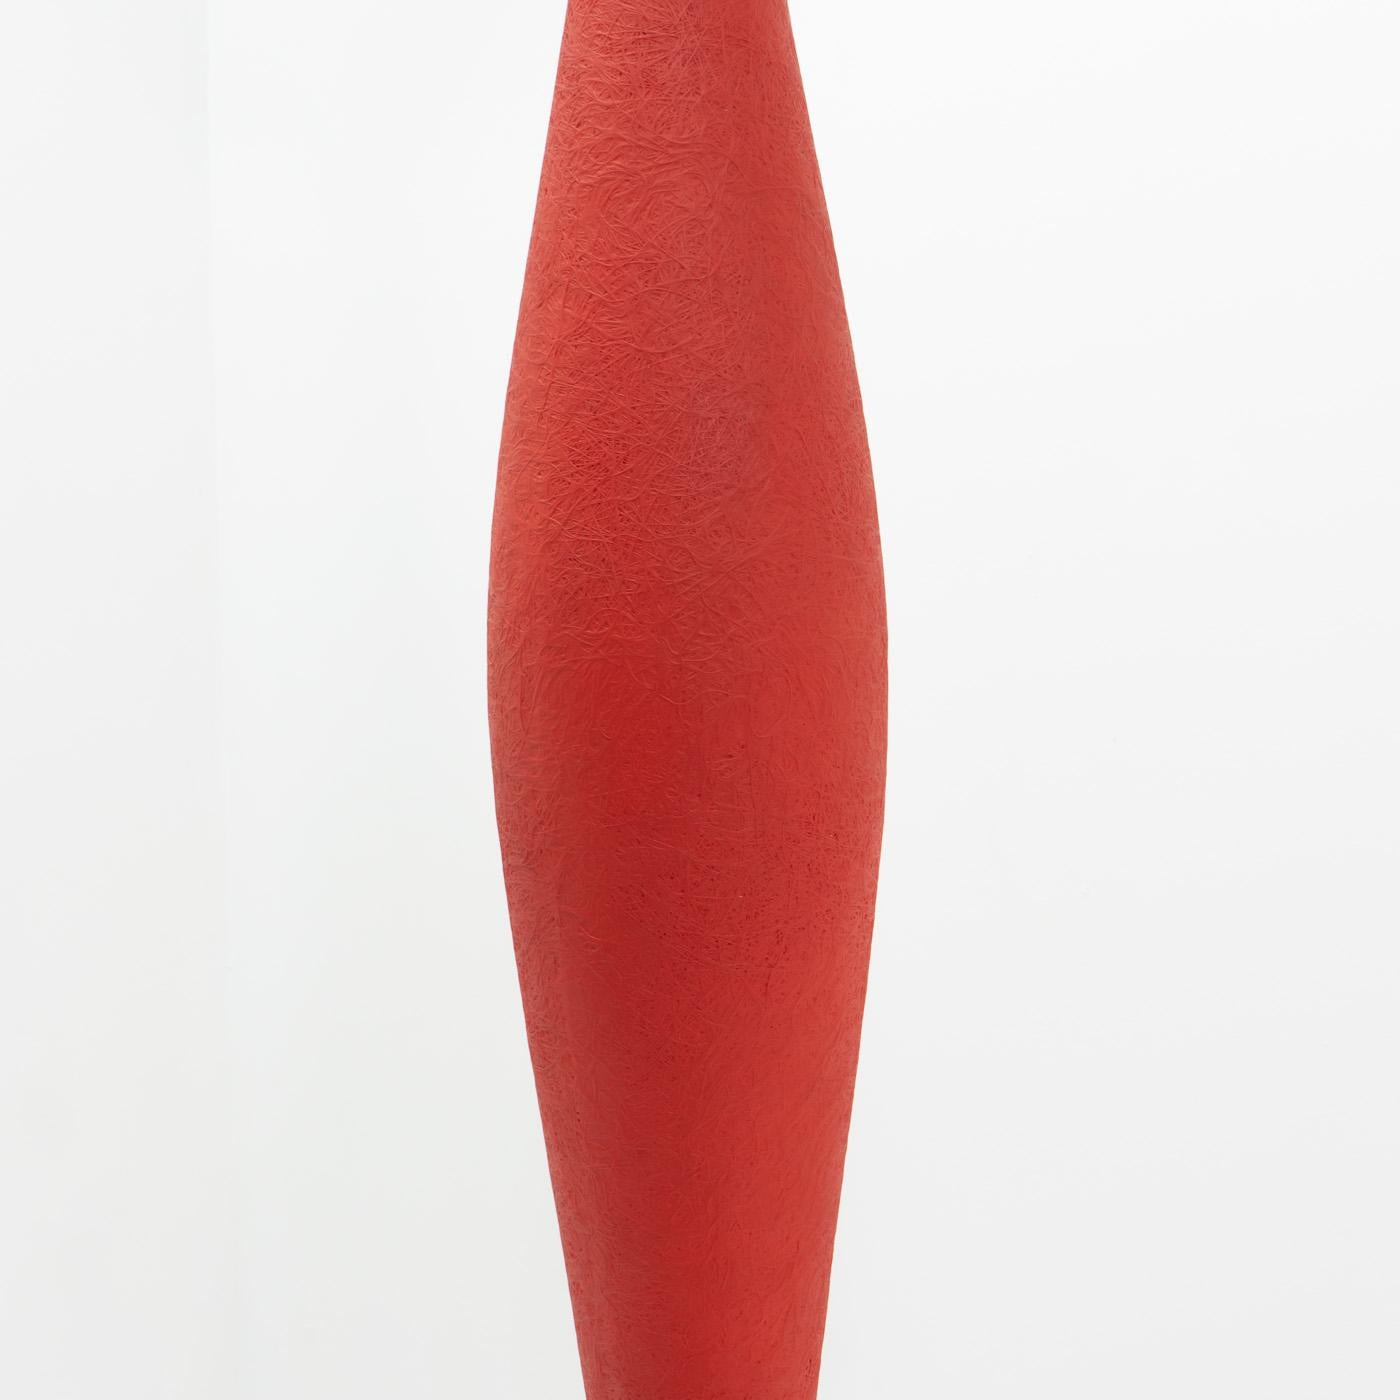 Organically Shaped E.T.A. Floor Lamp by Guglielmo Berchicci for Kundalini, 2000s For Sale 2